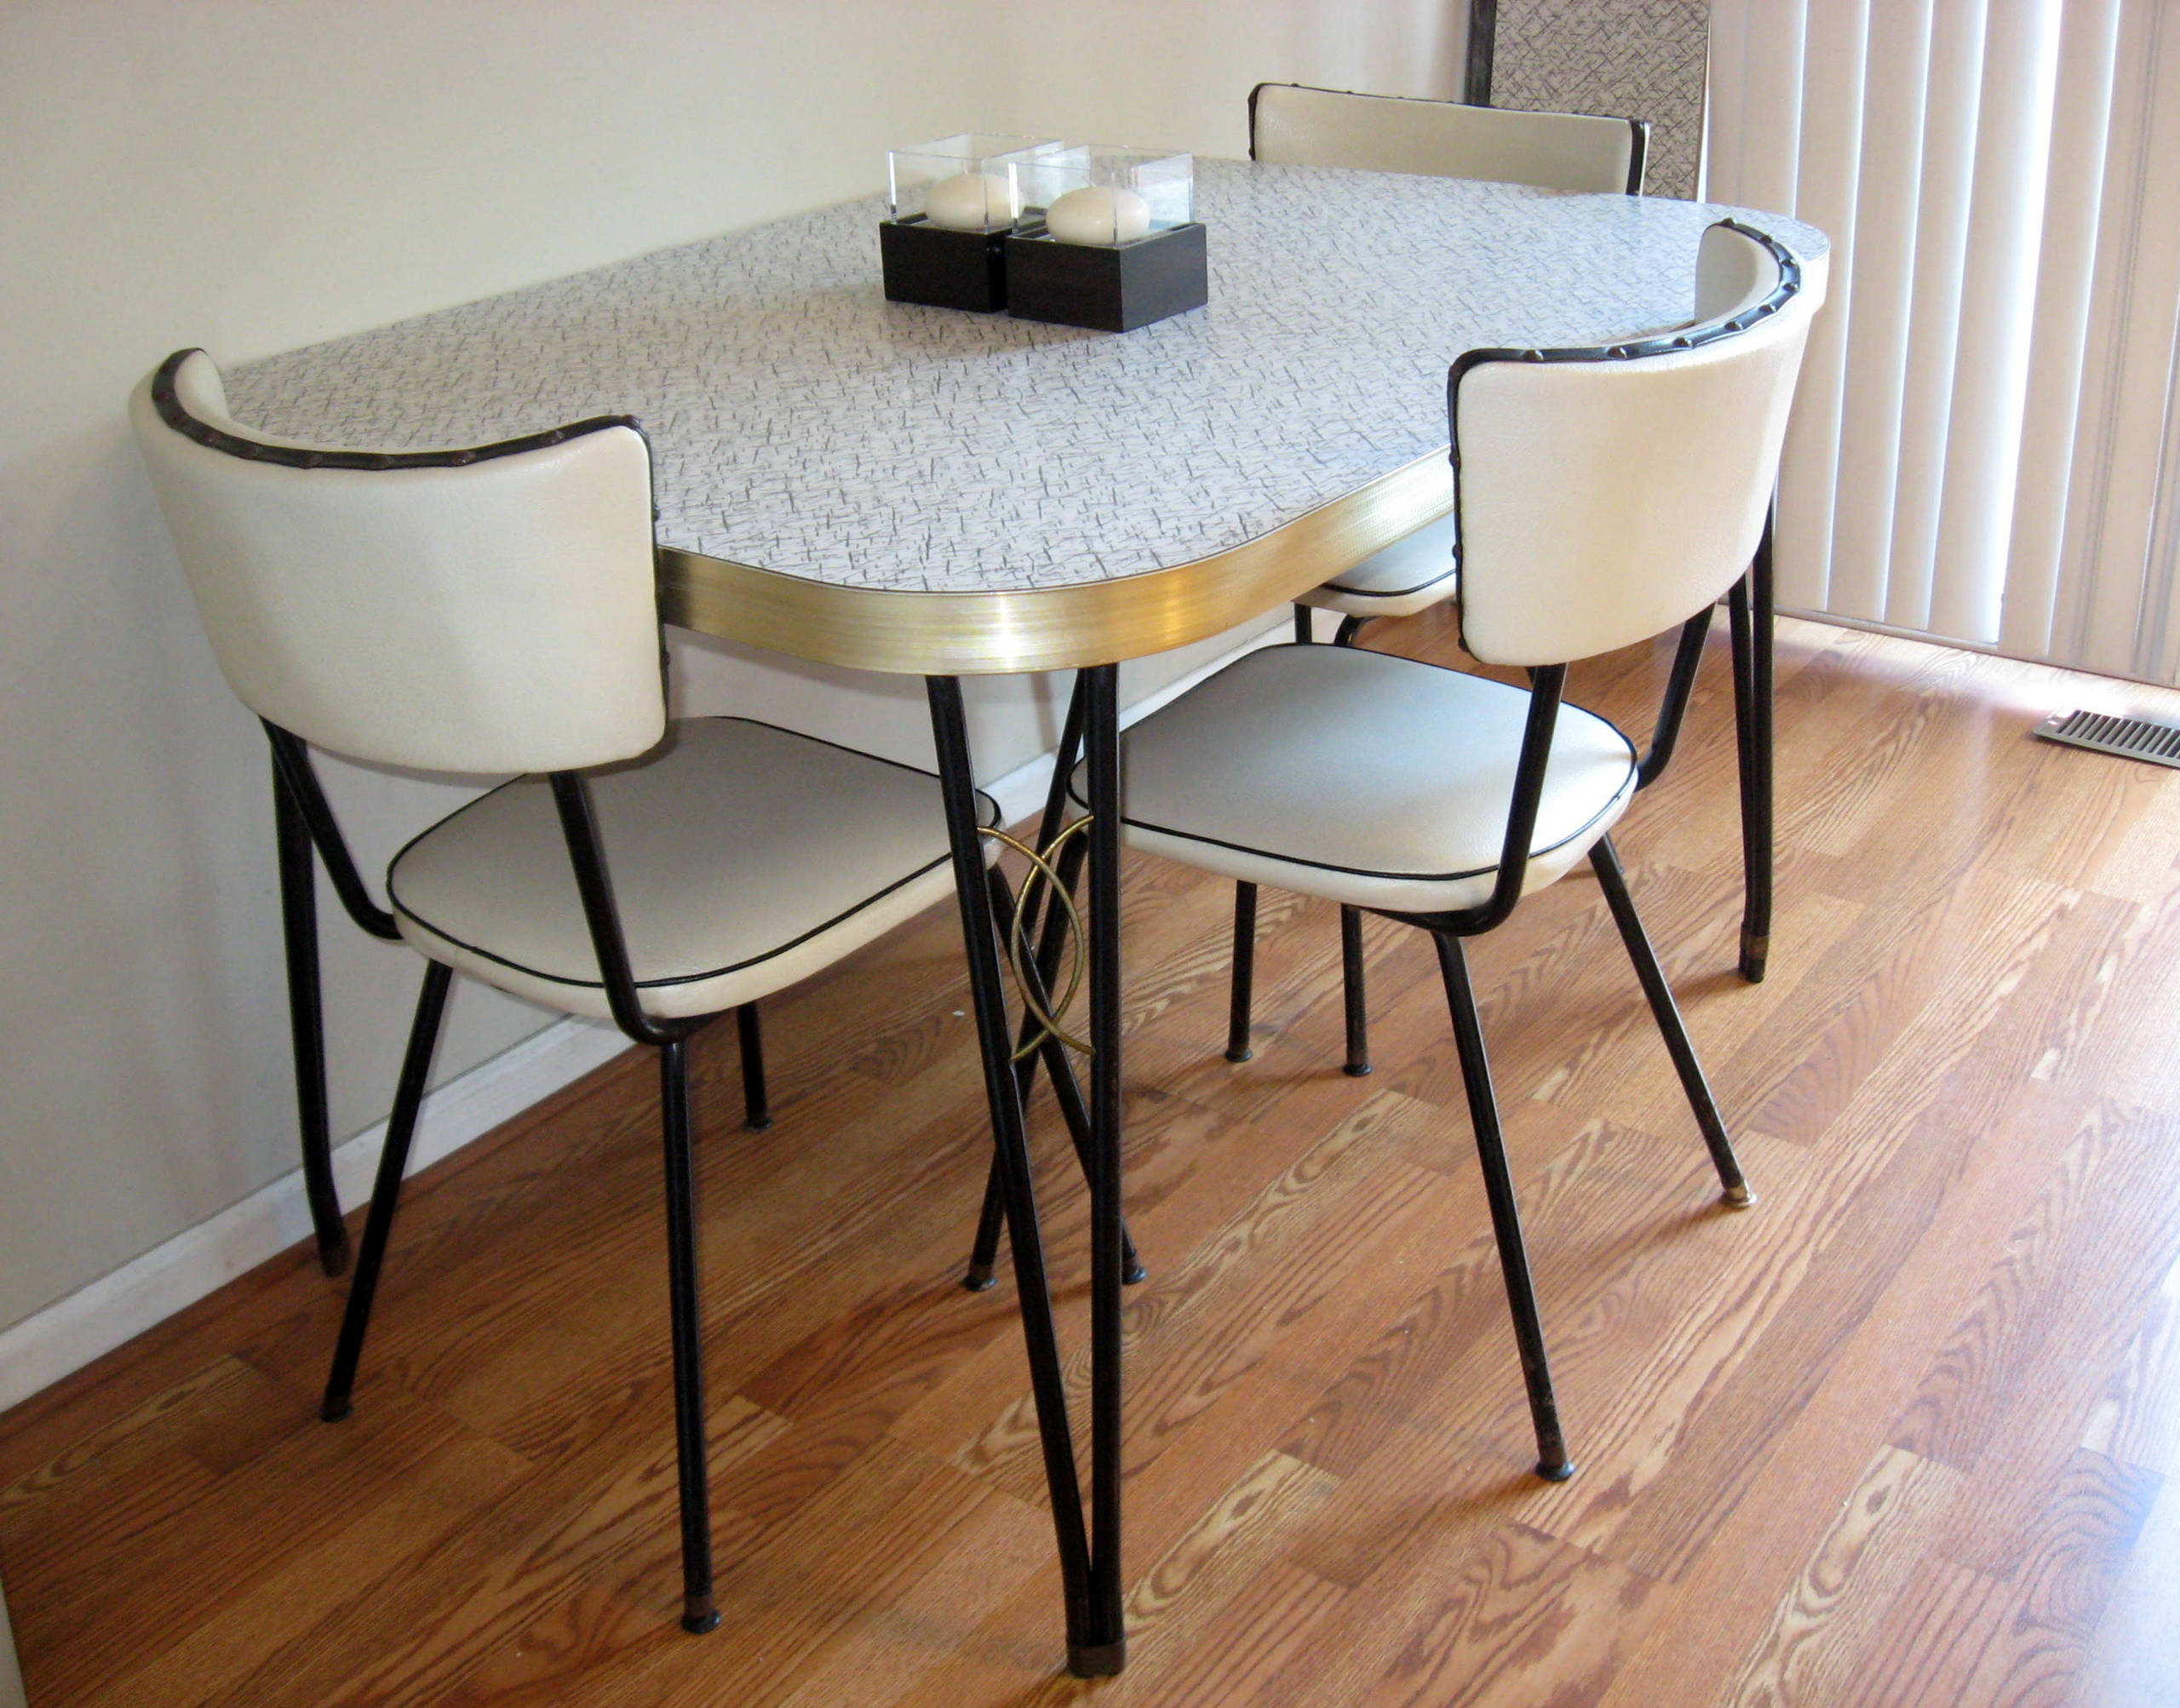 Retro Kitchen Table And Chairs Visualhunt, Retro Metal Kitchen Table And Chairs